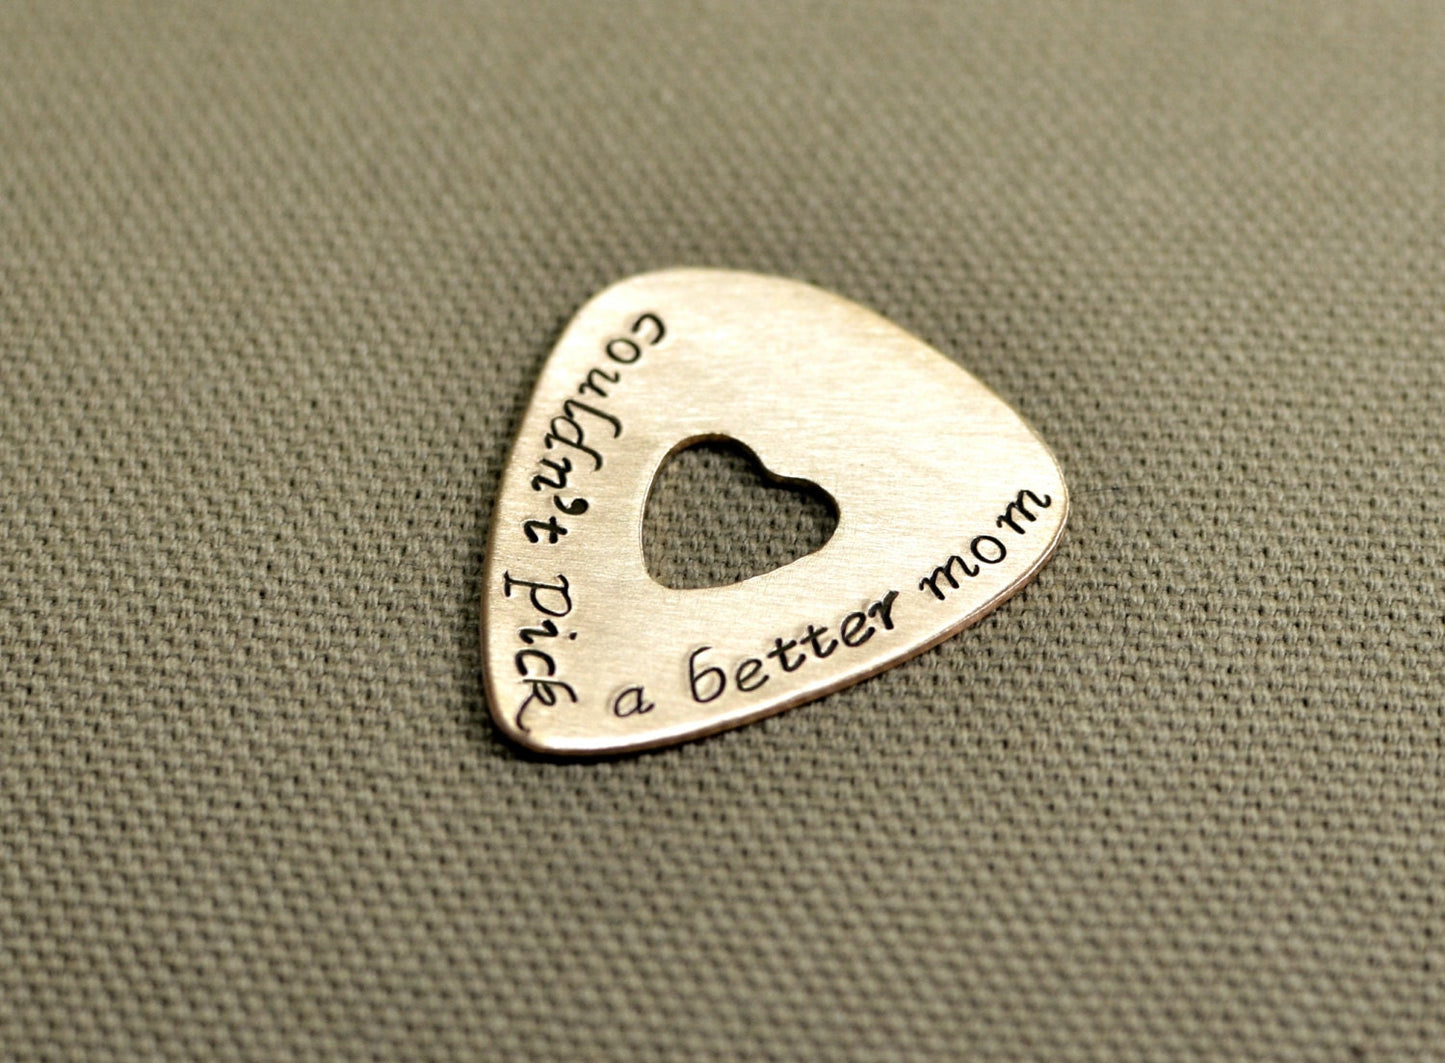 Couldn't pick a better mom guitar pick in bronze